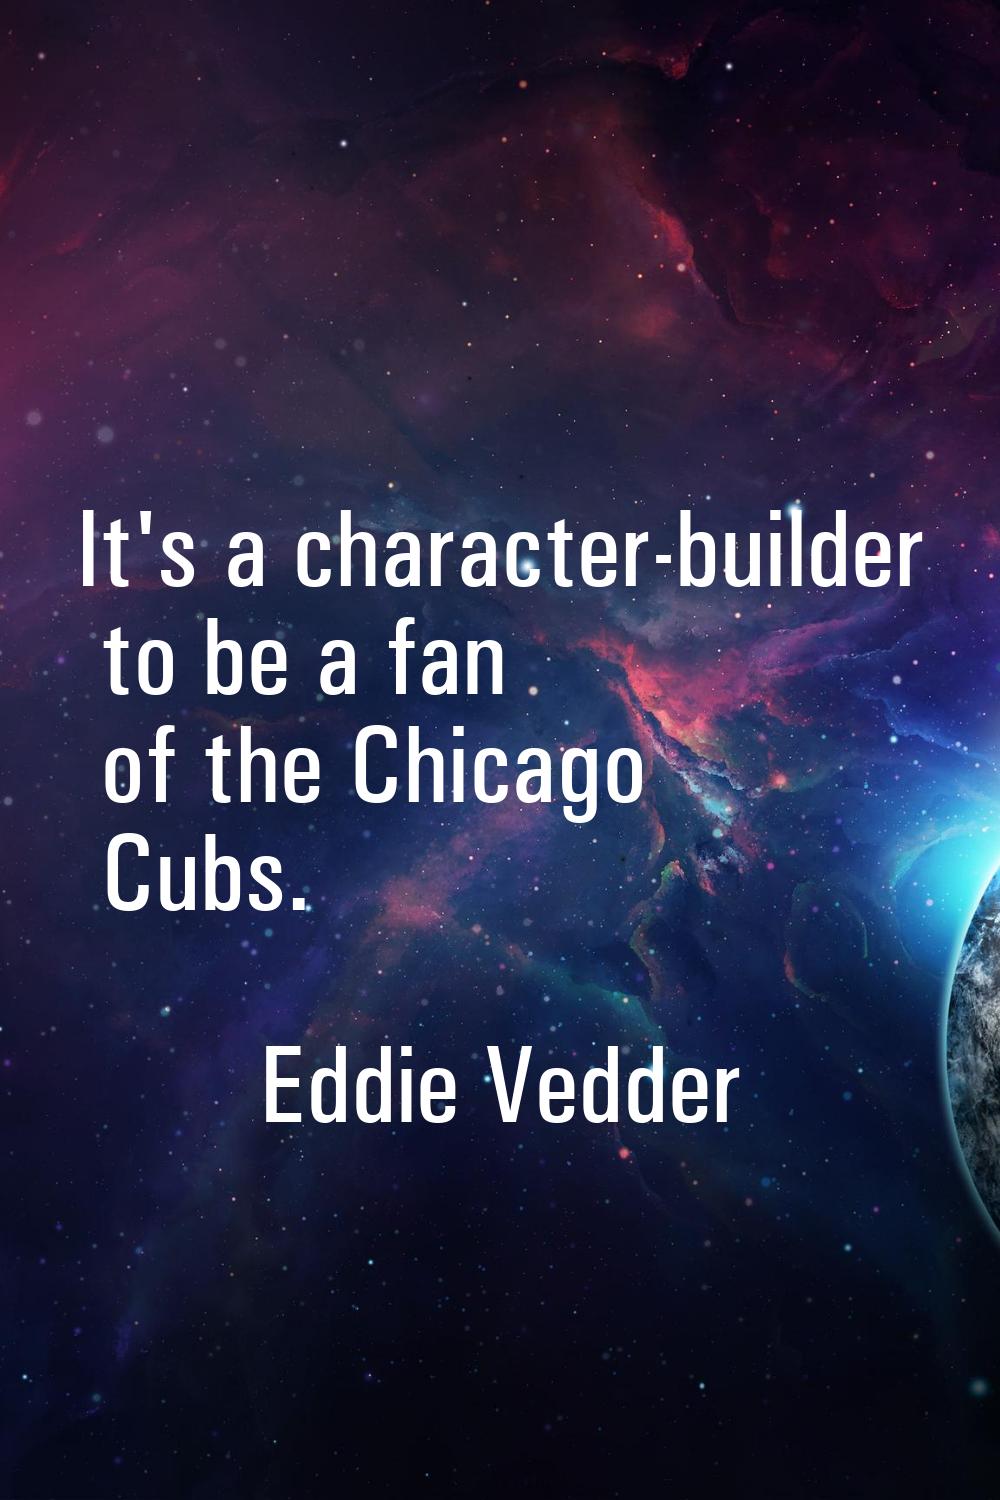 It's a character-builder to be a fan of the Chicago Cubs.